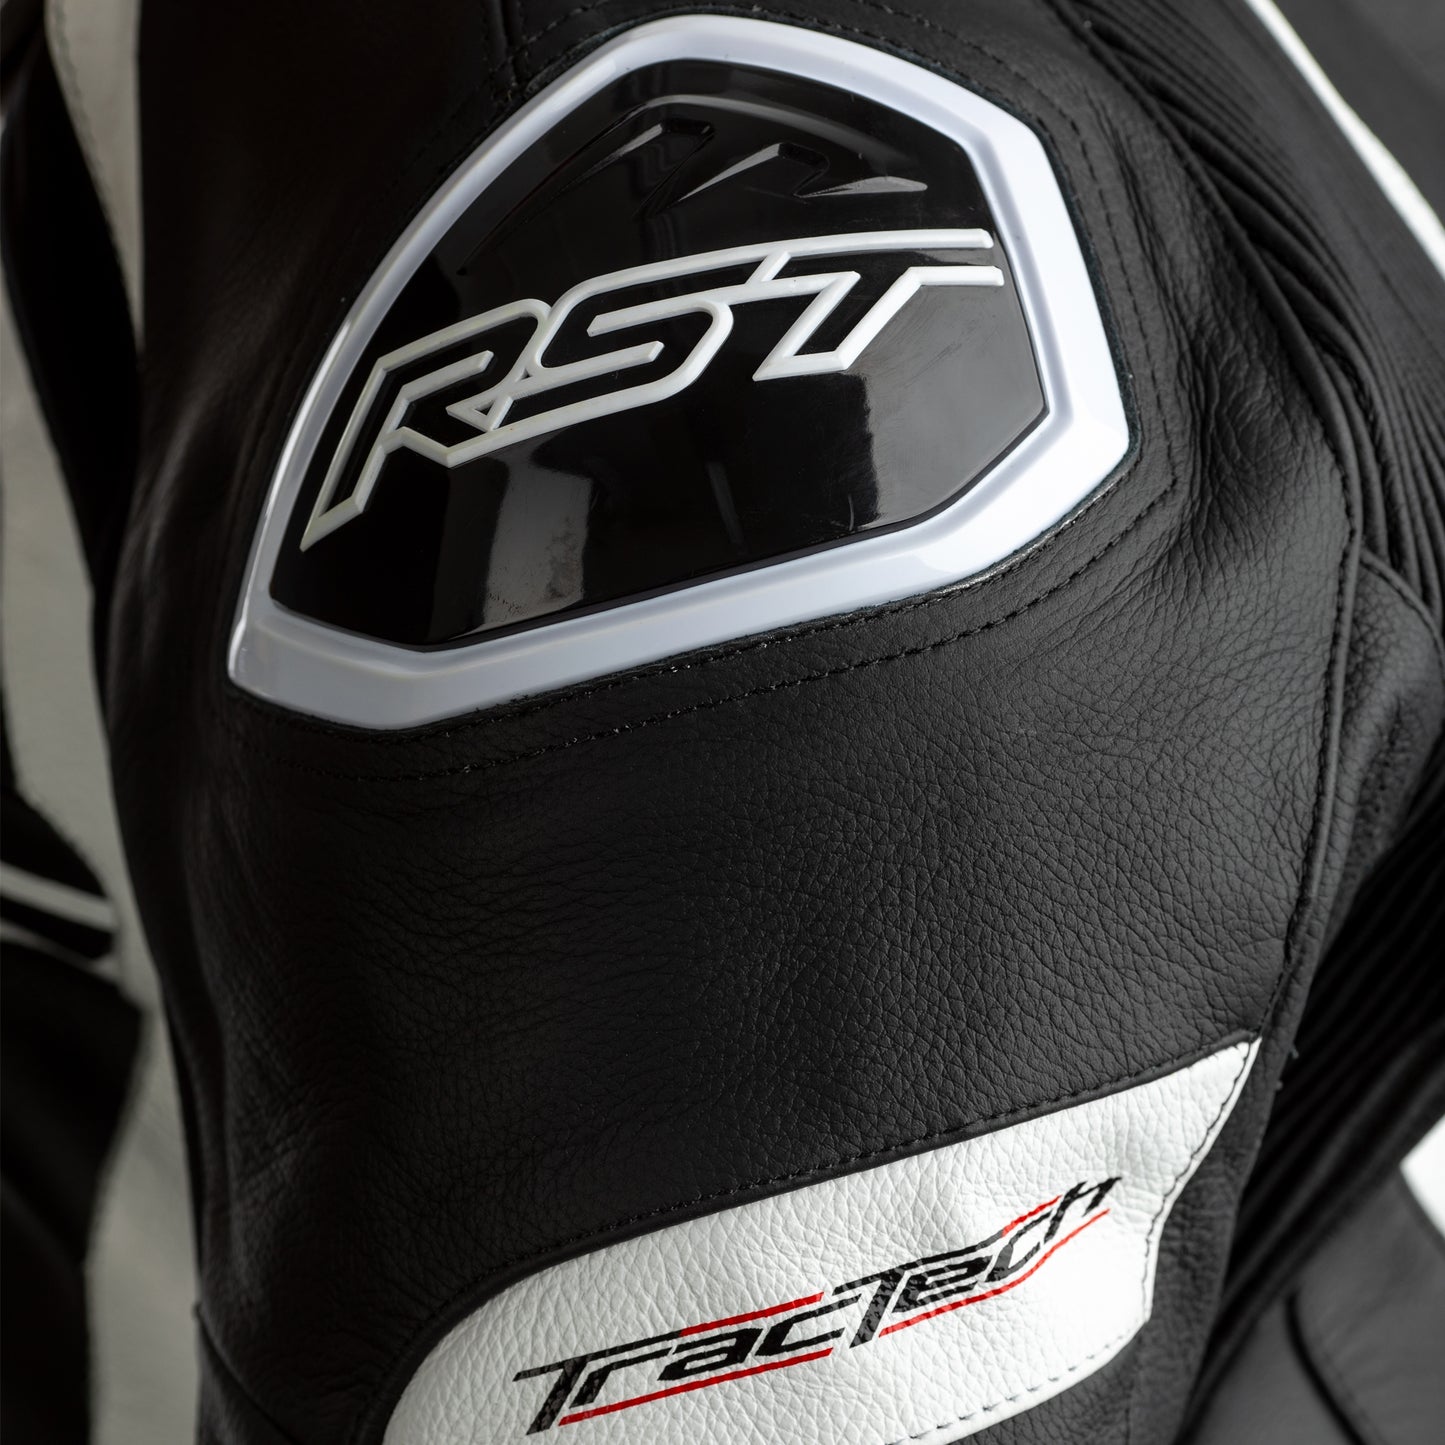 RST Tractech Evo 4 Youth (CE) 1 Piece Leather Suit - Black/White